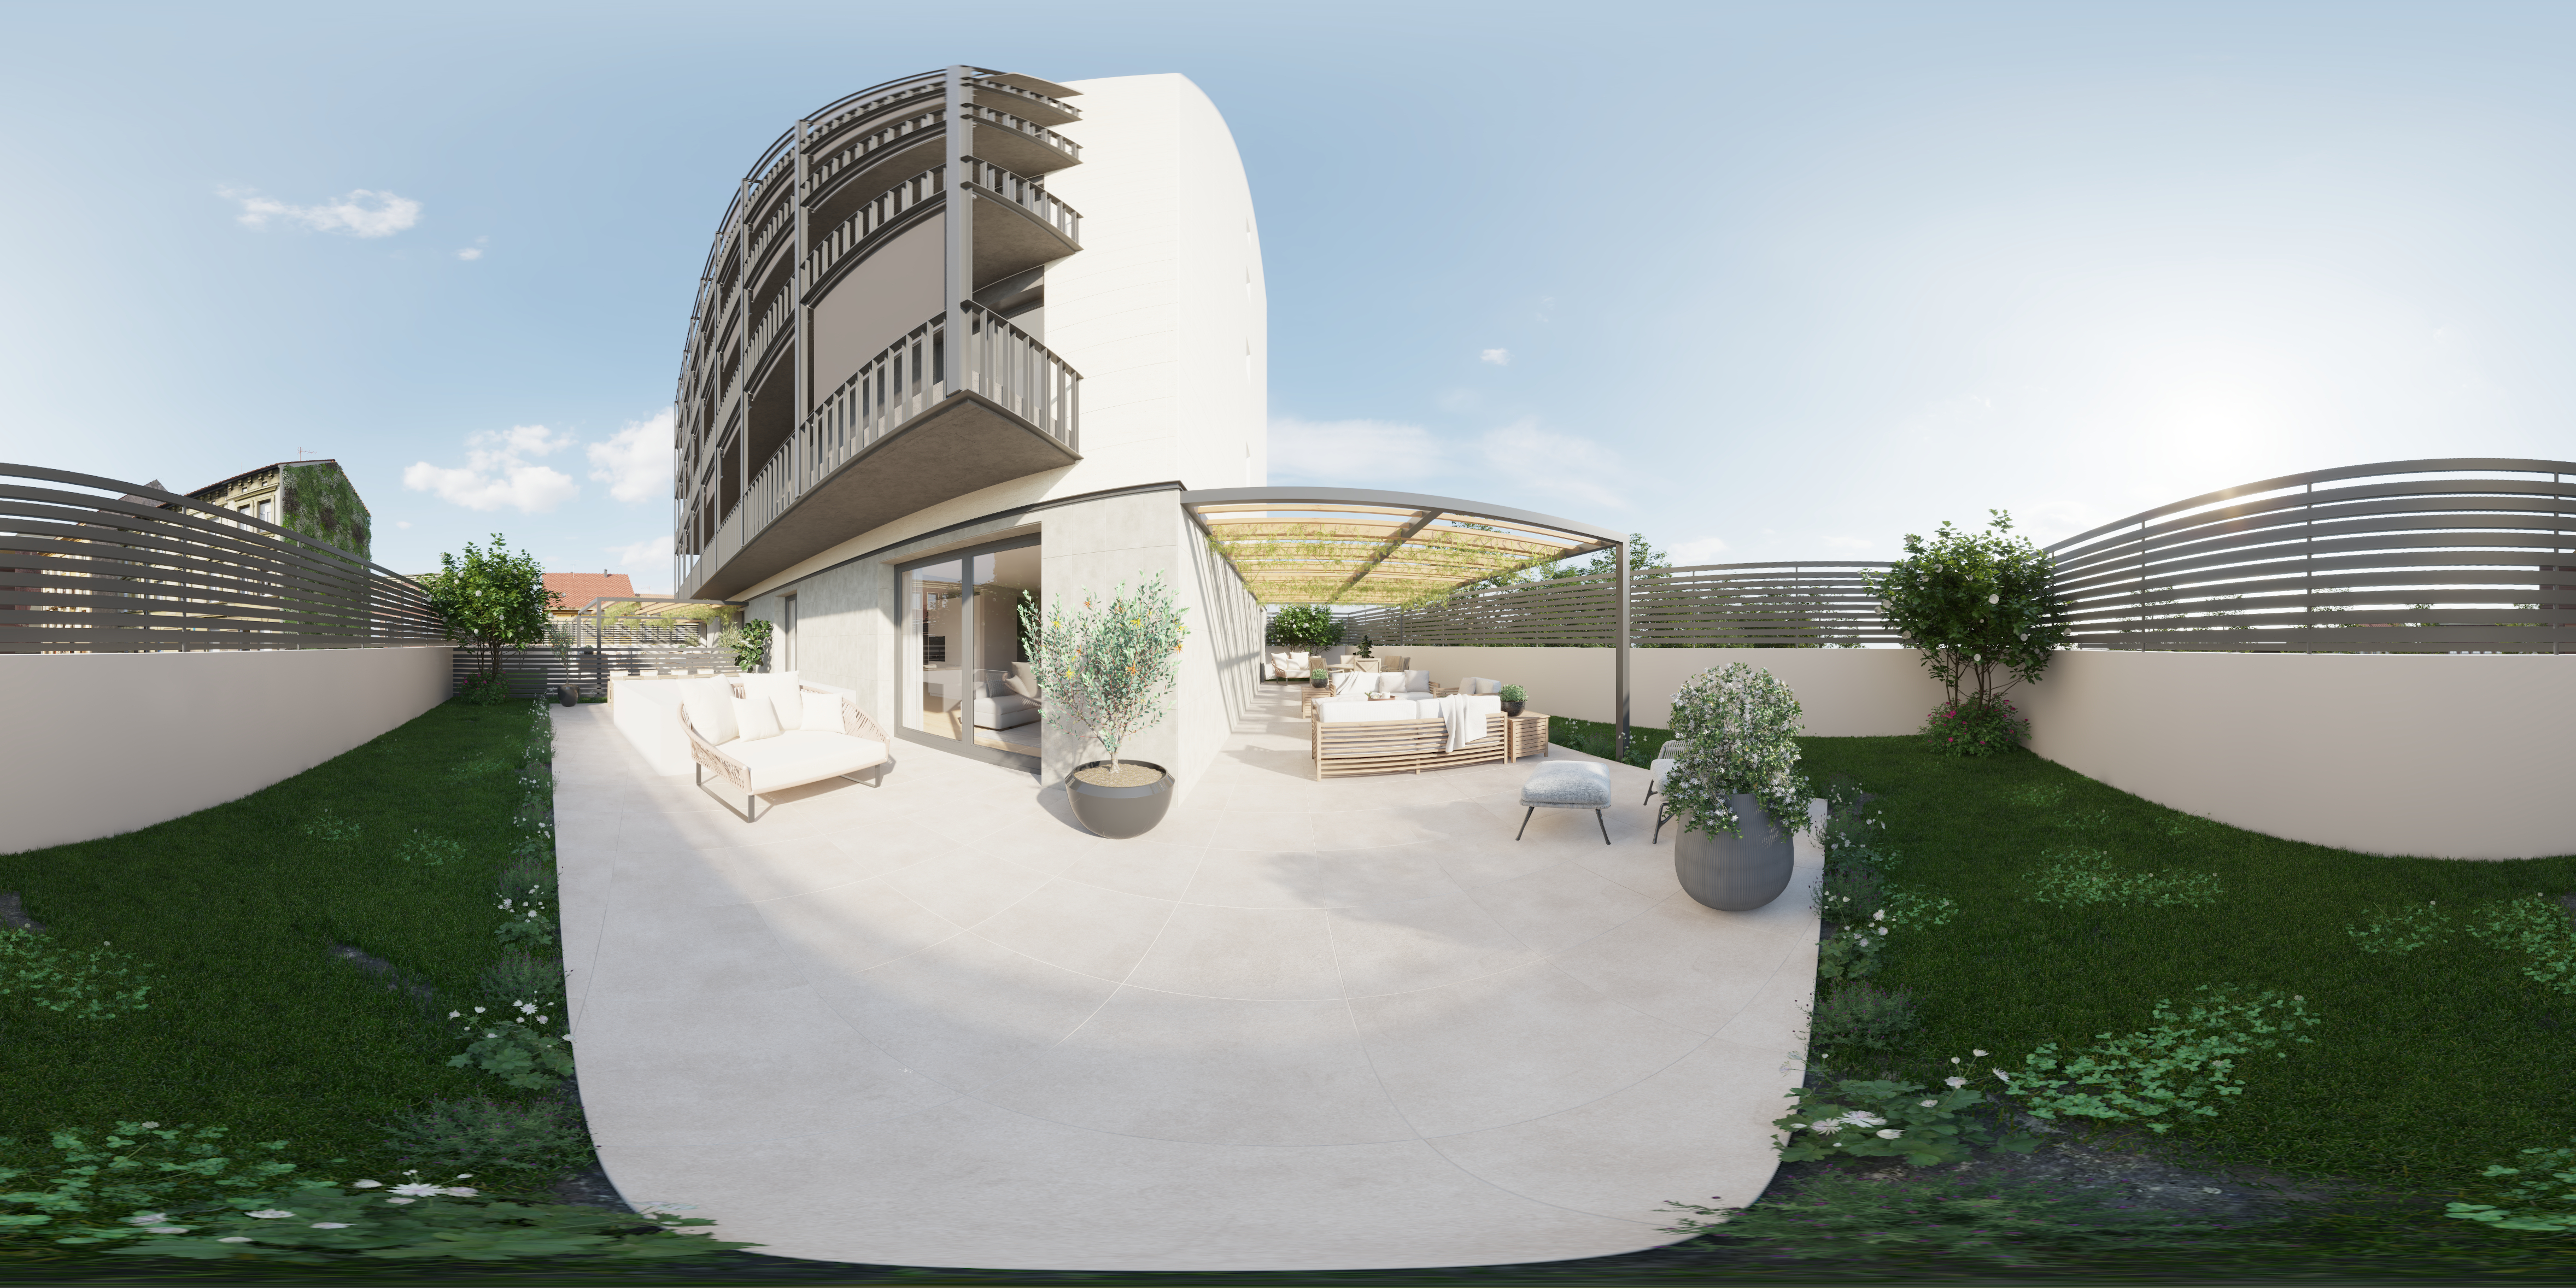 Immersive 360 render of hotel pool area with realistic outdoor furniture and greenery, rattan outdoor chairs, steel balconies, olive trees and white tile facade